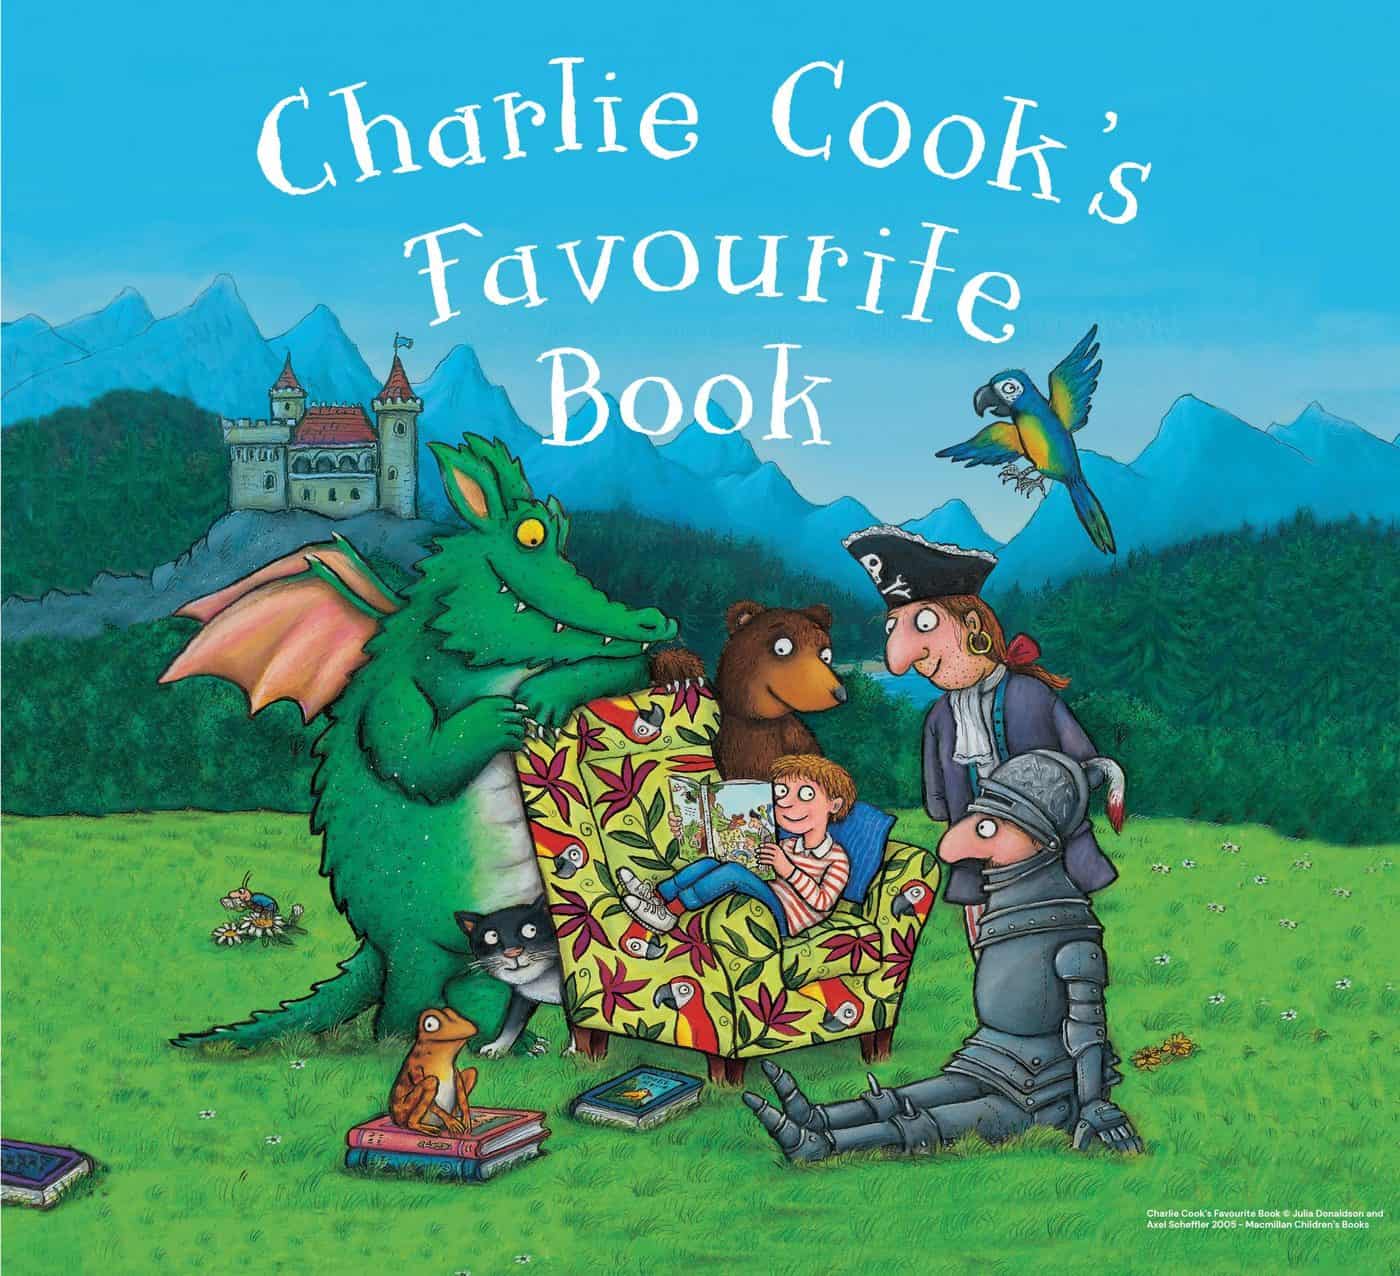 charlie cook's favourite book